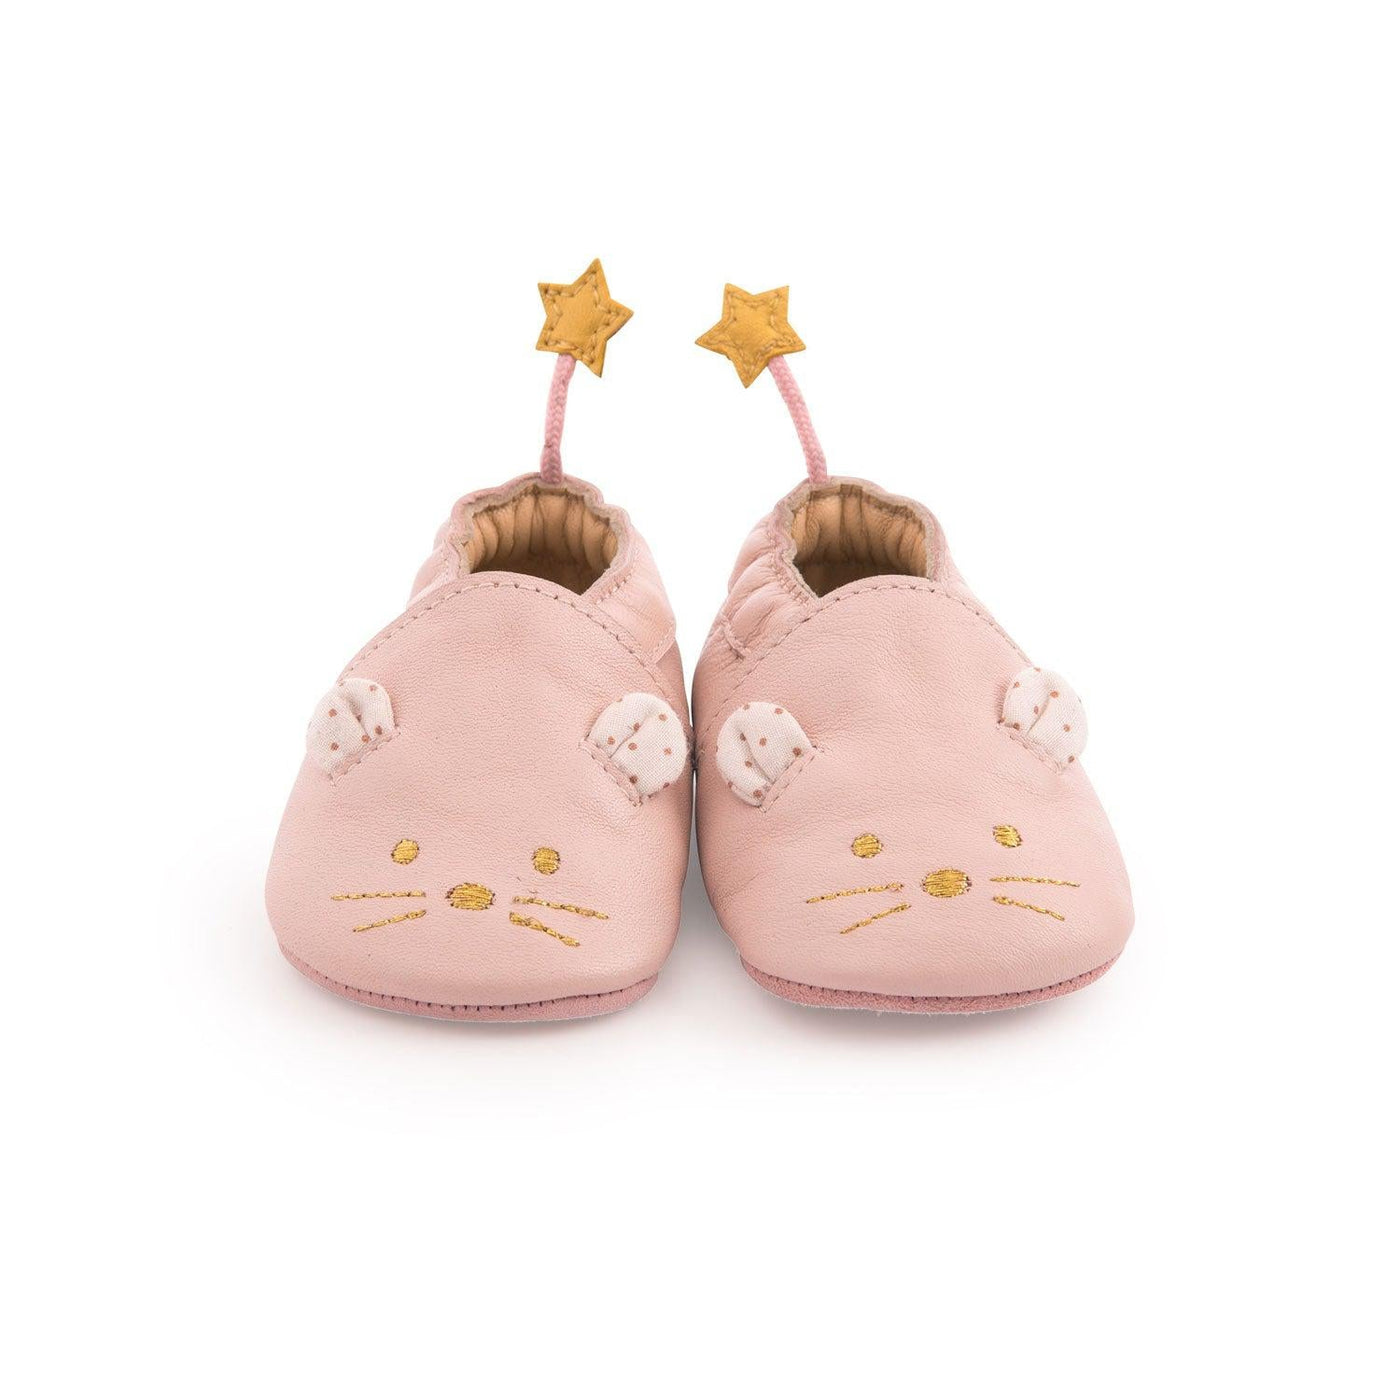 Pink Leather Slippers - Il Était Une Fois-Baby Shoes-Moulin Roty-Yes Bebe